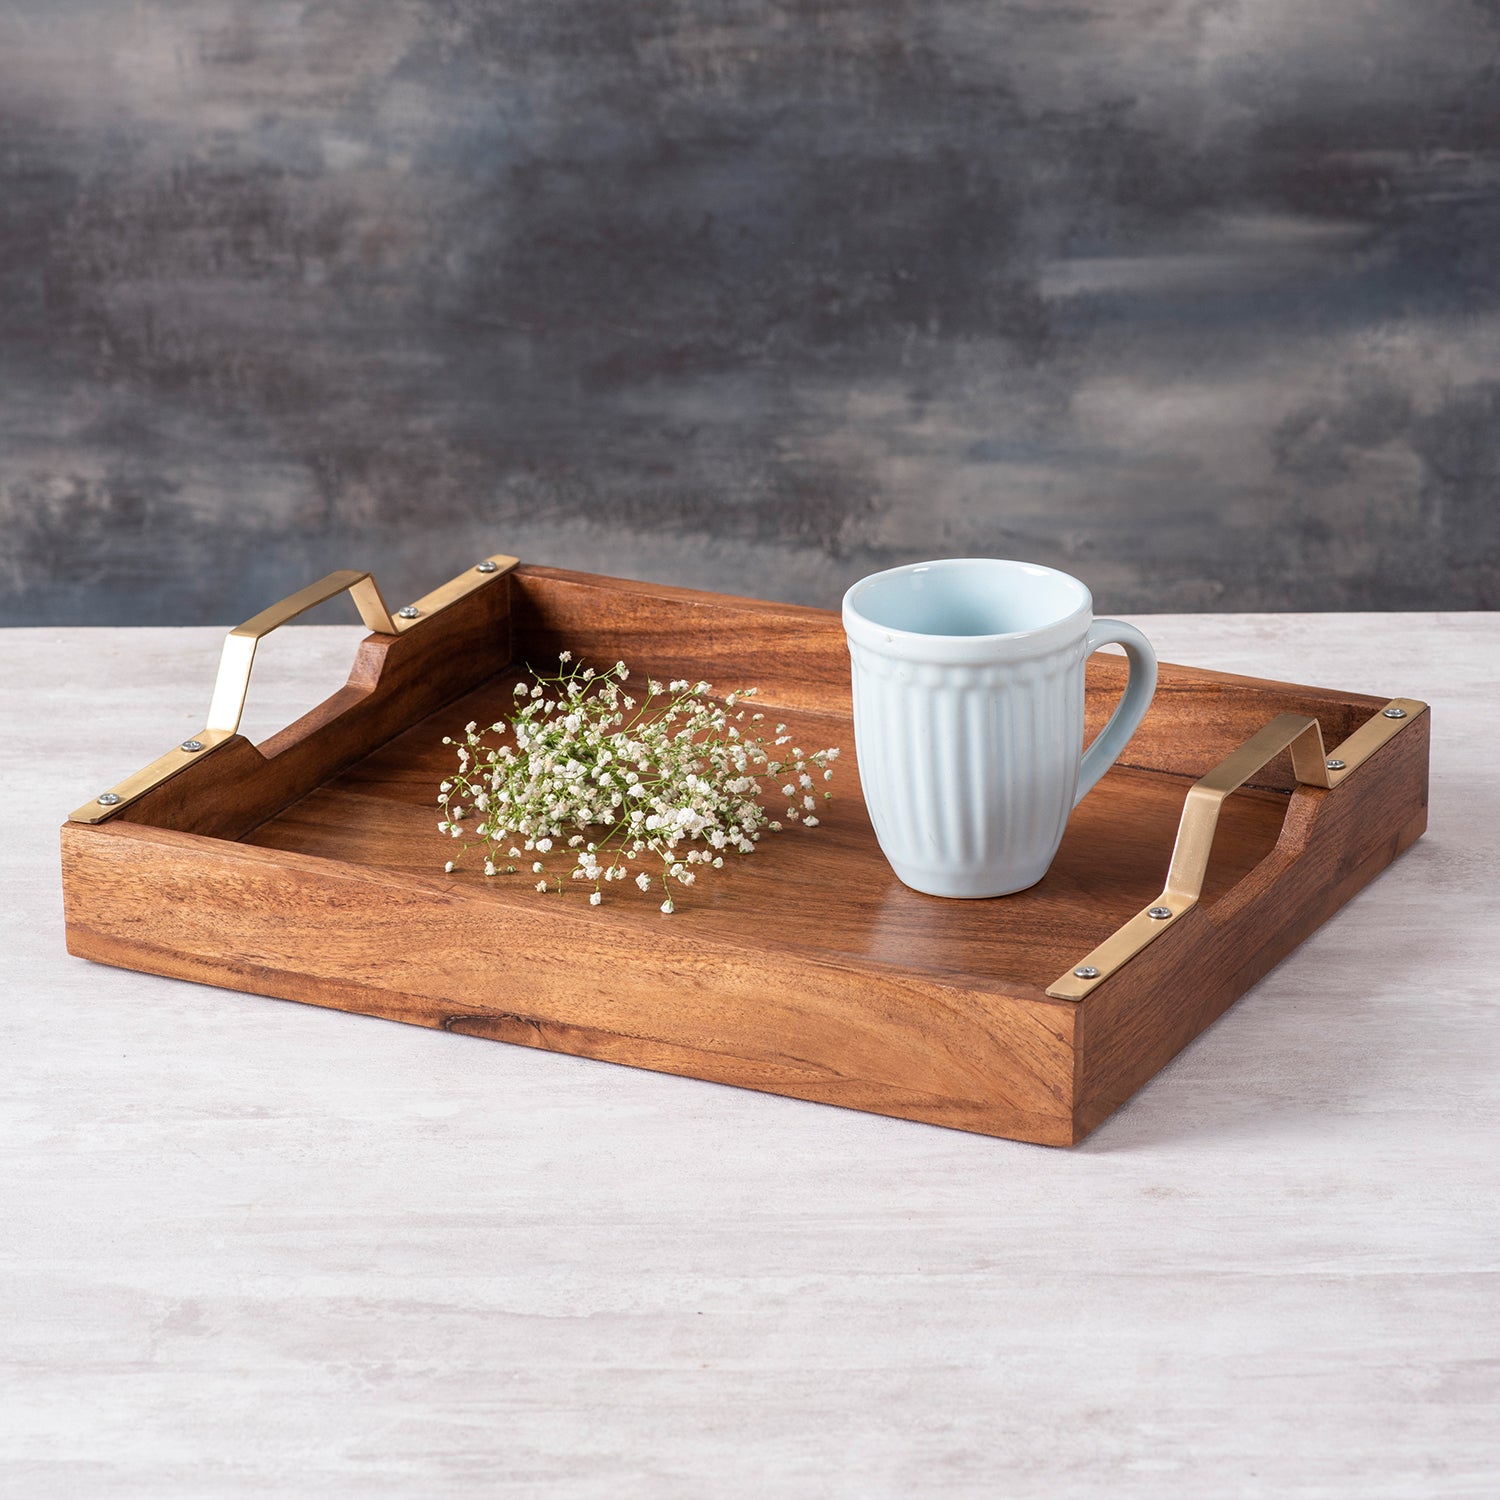 Buy Online Serving Trays | Wooden Serving Trays with Handle